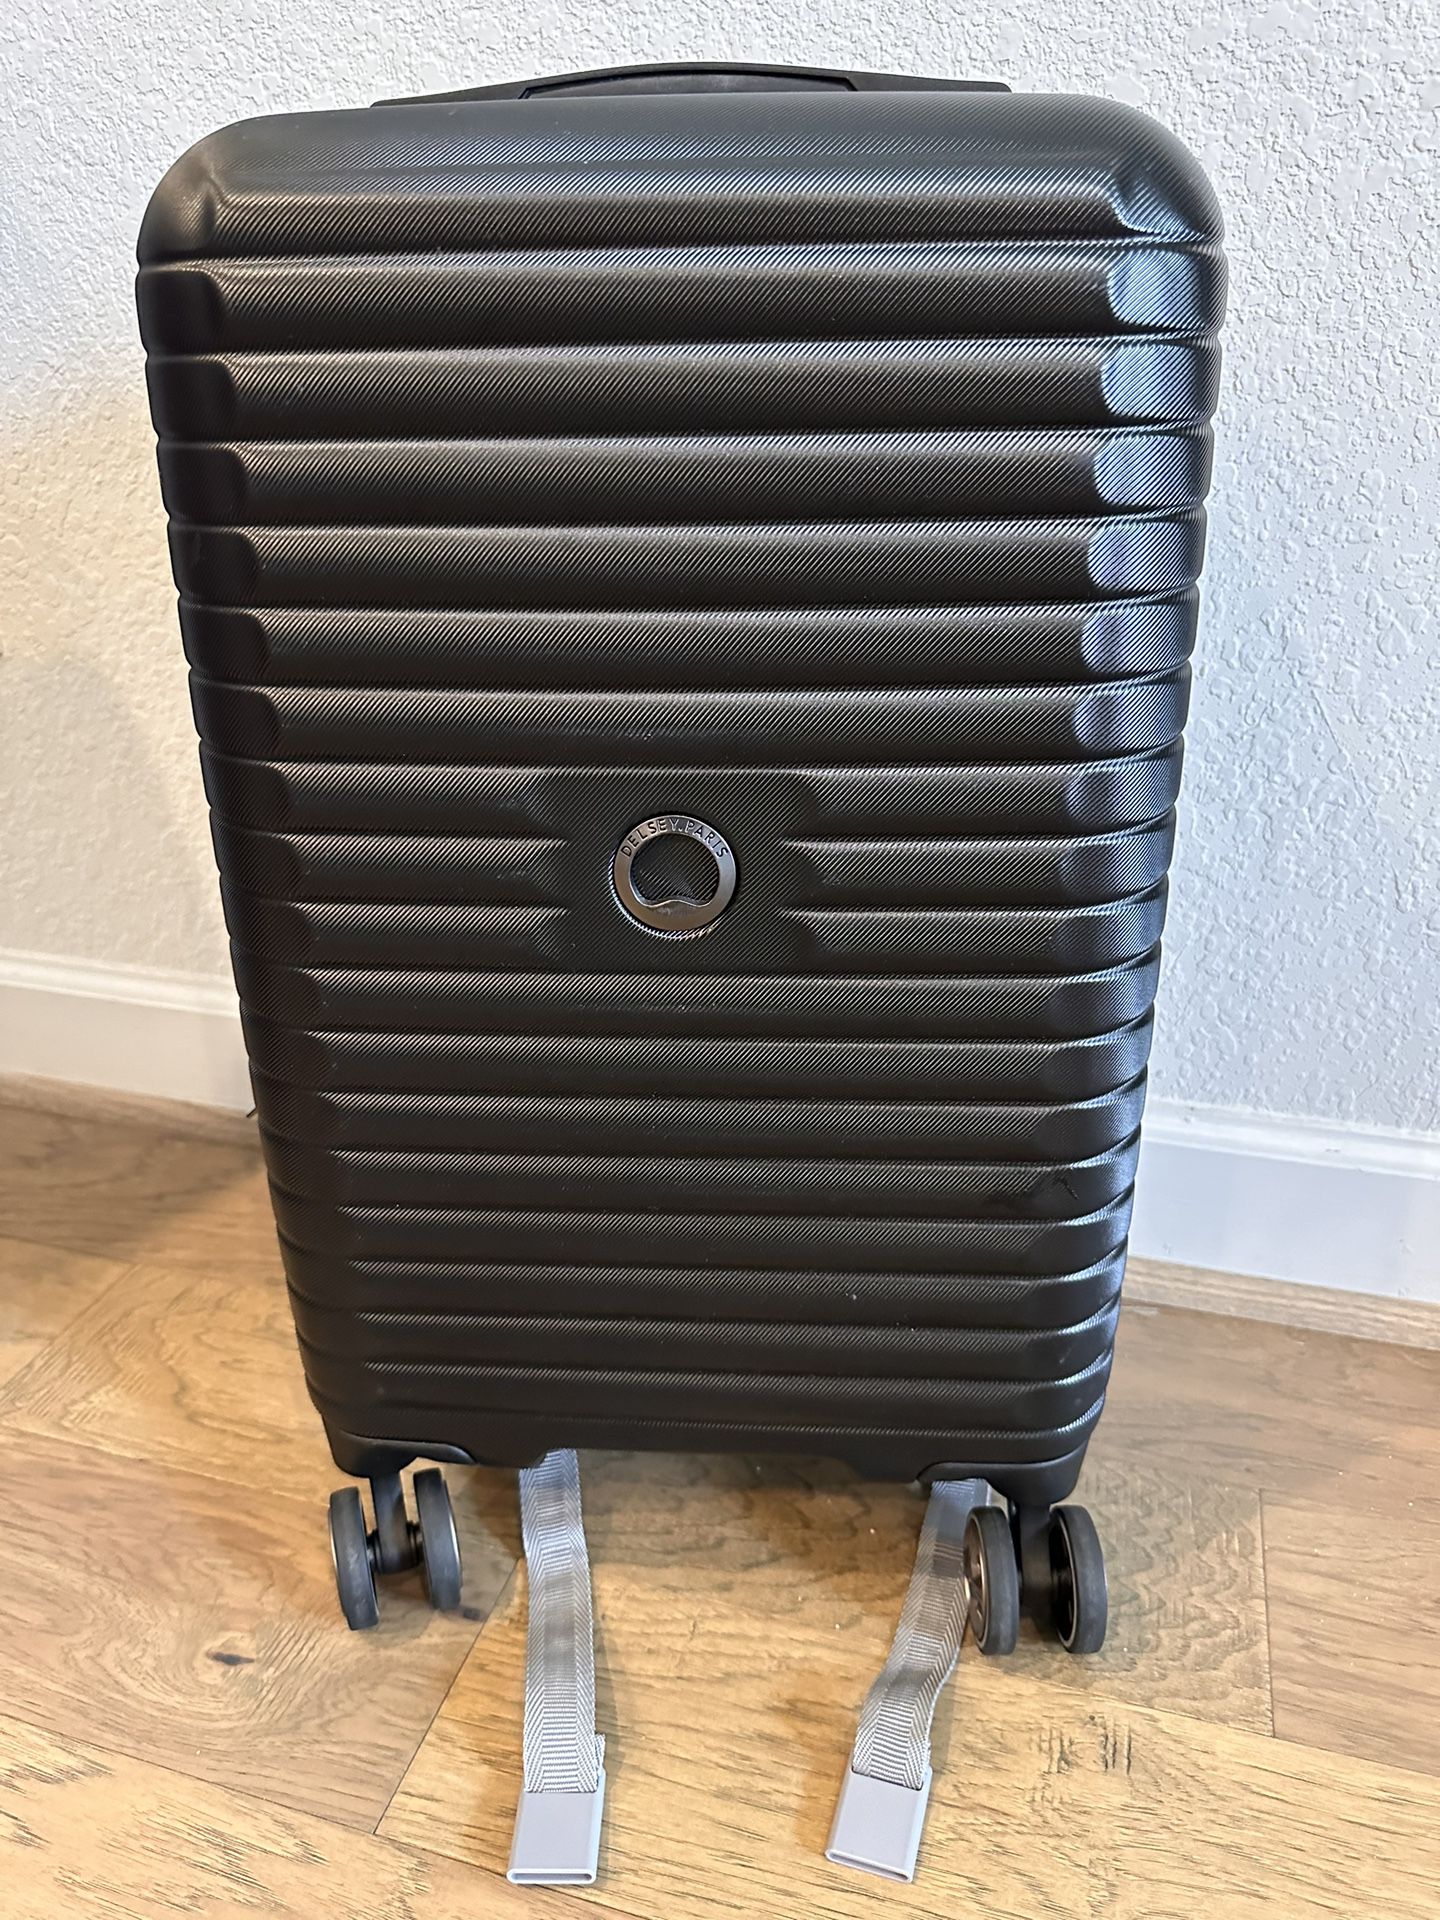 Carry On Luggage  $35 Each. 